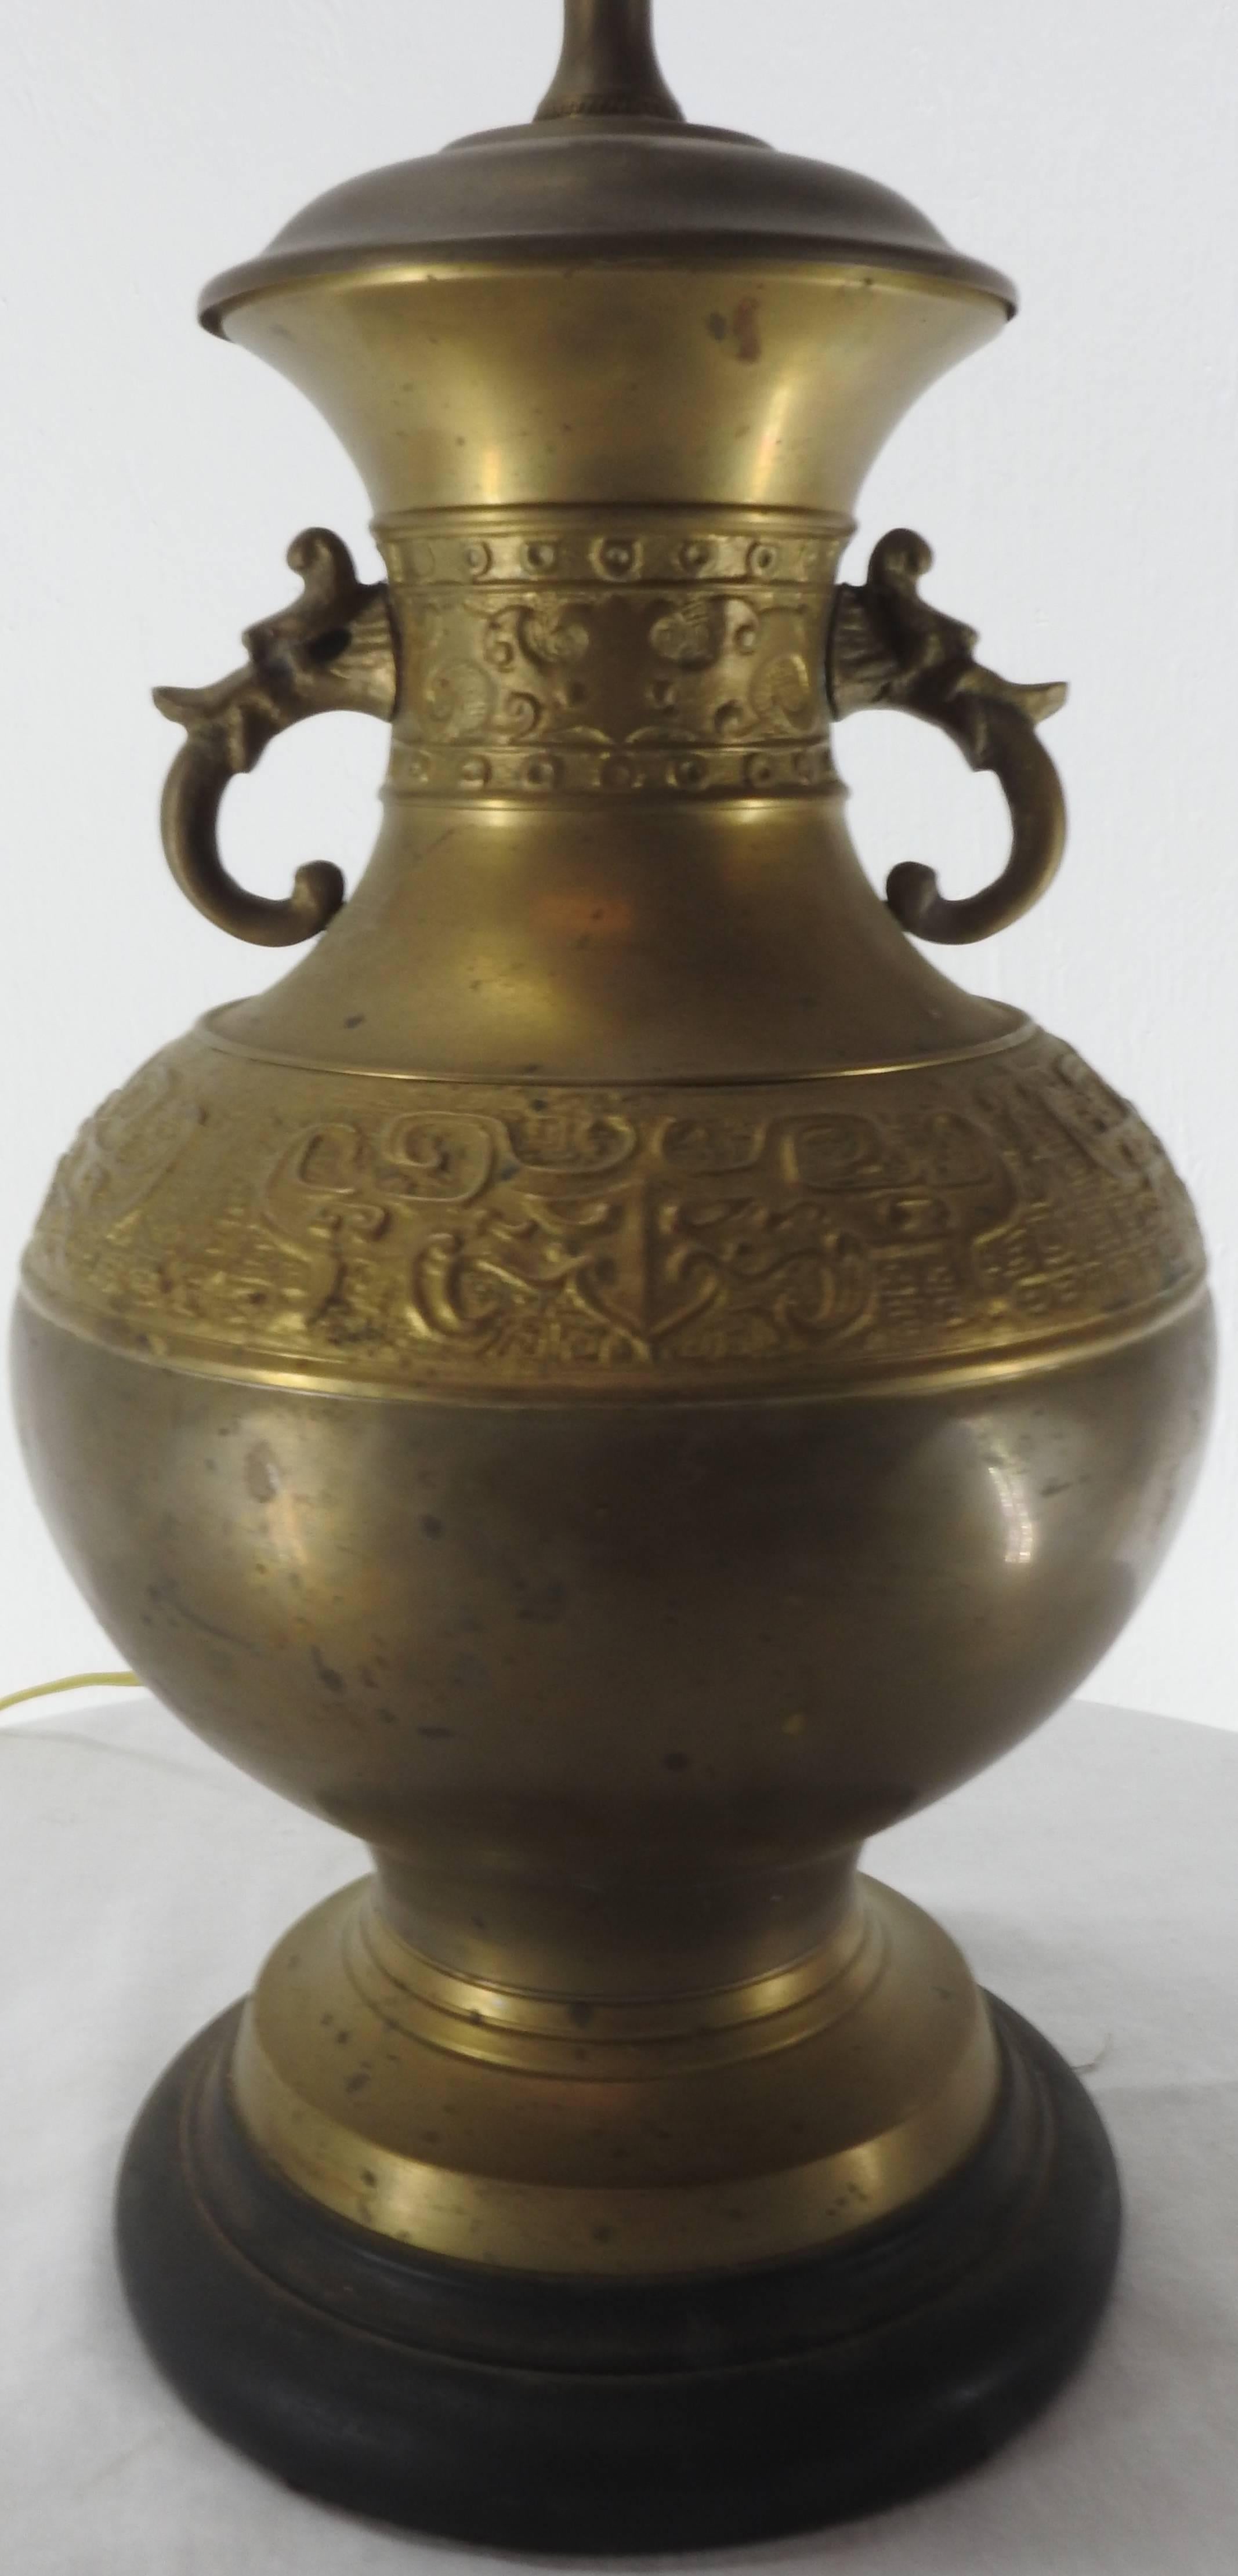 We are offering a cast brass lamp with elegantly scrolled arms and detailed embossing. The lamp sits atop a black base. You will receive the harp to attach your shade and it is topped off with an oriental finial. The embossing adds a distinct air of